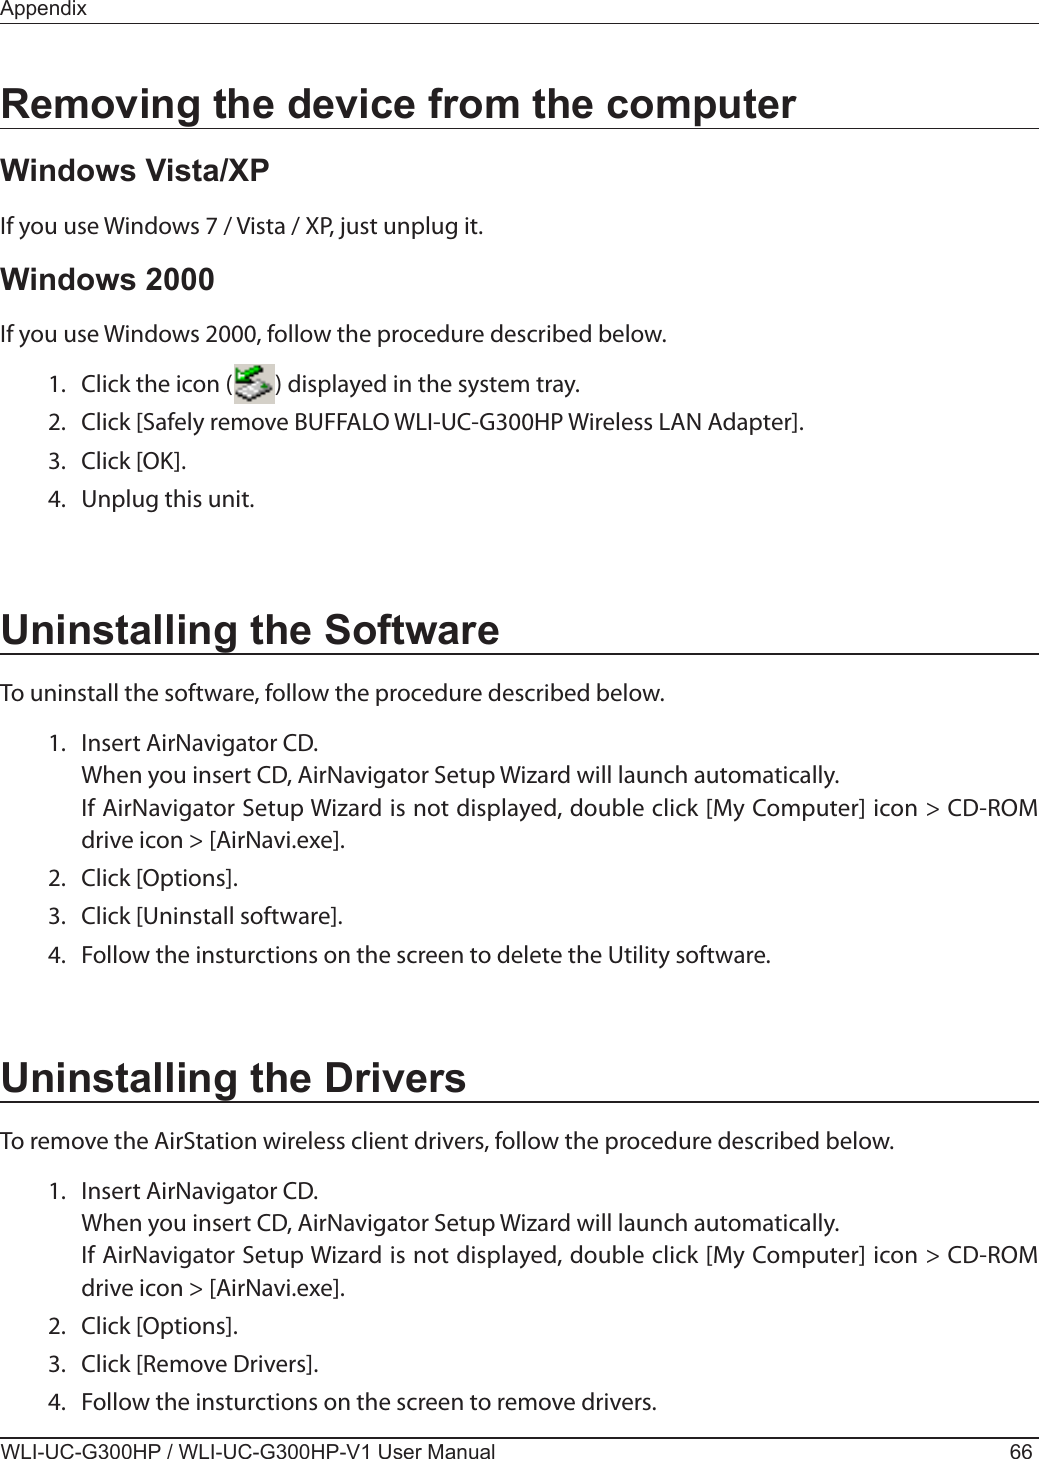 WLI-UC-G300HP / WLI-UC-G300HP-V1 User Manual 66AppendixRemoving the device from the computerWindows Vista/XPIf you use Windows 7 / Vista / XP, just unplug it.Windows 2000If you use Windows 2000, follow the procedure described below.  1.  Click the icon (        ) displayed in the system tray.  2.  Click [Safely remove BUFFALO WLI-UC-G300HP Wireless LAN Adapter].  3.  Click [OK].  4.  Unplug this unit.Uninstalling the SoftwareTo uninstall the software, follow the procedure described below.  1.  Insert AirNavigator CD.    When you insert CD, AirNavigator Setup Wizard will launch automatically.    If AirNavigator Setup Wizard is not displayed, double click [My Computer] icon &gt; CD-ROM drive icon &gt; [AirNavi.exe].  2.  Click [Options].  3.  Click [Uninstall software].  4.  Follow the insturctions on the screen to delete the Utility software.Uninstalling the DriversTo remove the AirStation wireless client drivers, follow the procedure described below.  1.  Insert AirNavigator CD.    When you insert CD, AirNavigator Setup Wizard will launch automatically.    If AirNavigator Setup Wizard is not displayed, double click [My Computer] icon &gt; CD-ROM drive icon &gt; [AirNavi.exe].  2.  Click [Options].  3.  Click [Remove Drivers].  4.  Follow the insturctions on the screen to remove drivers.